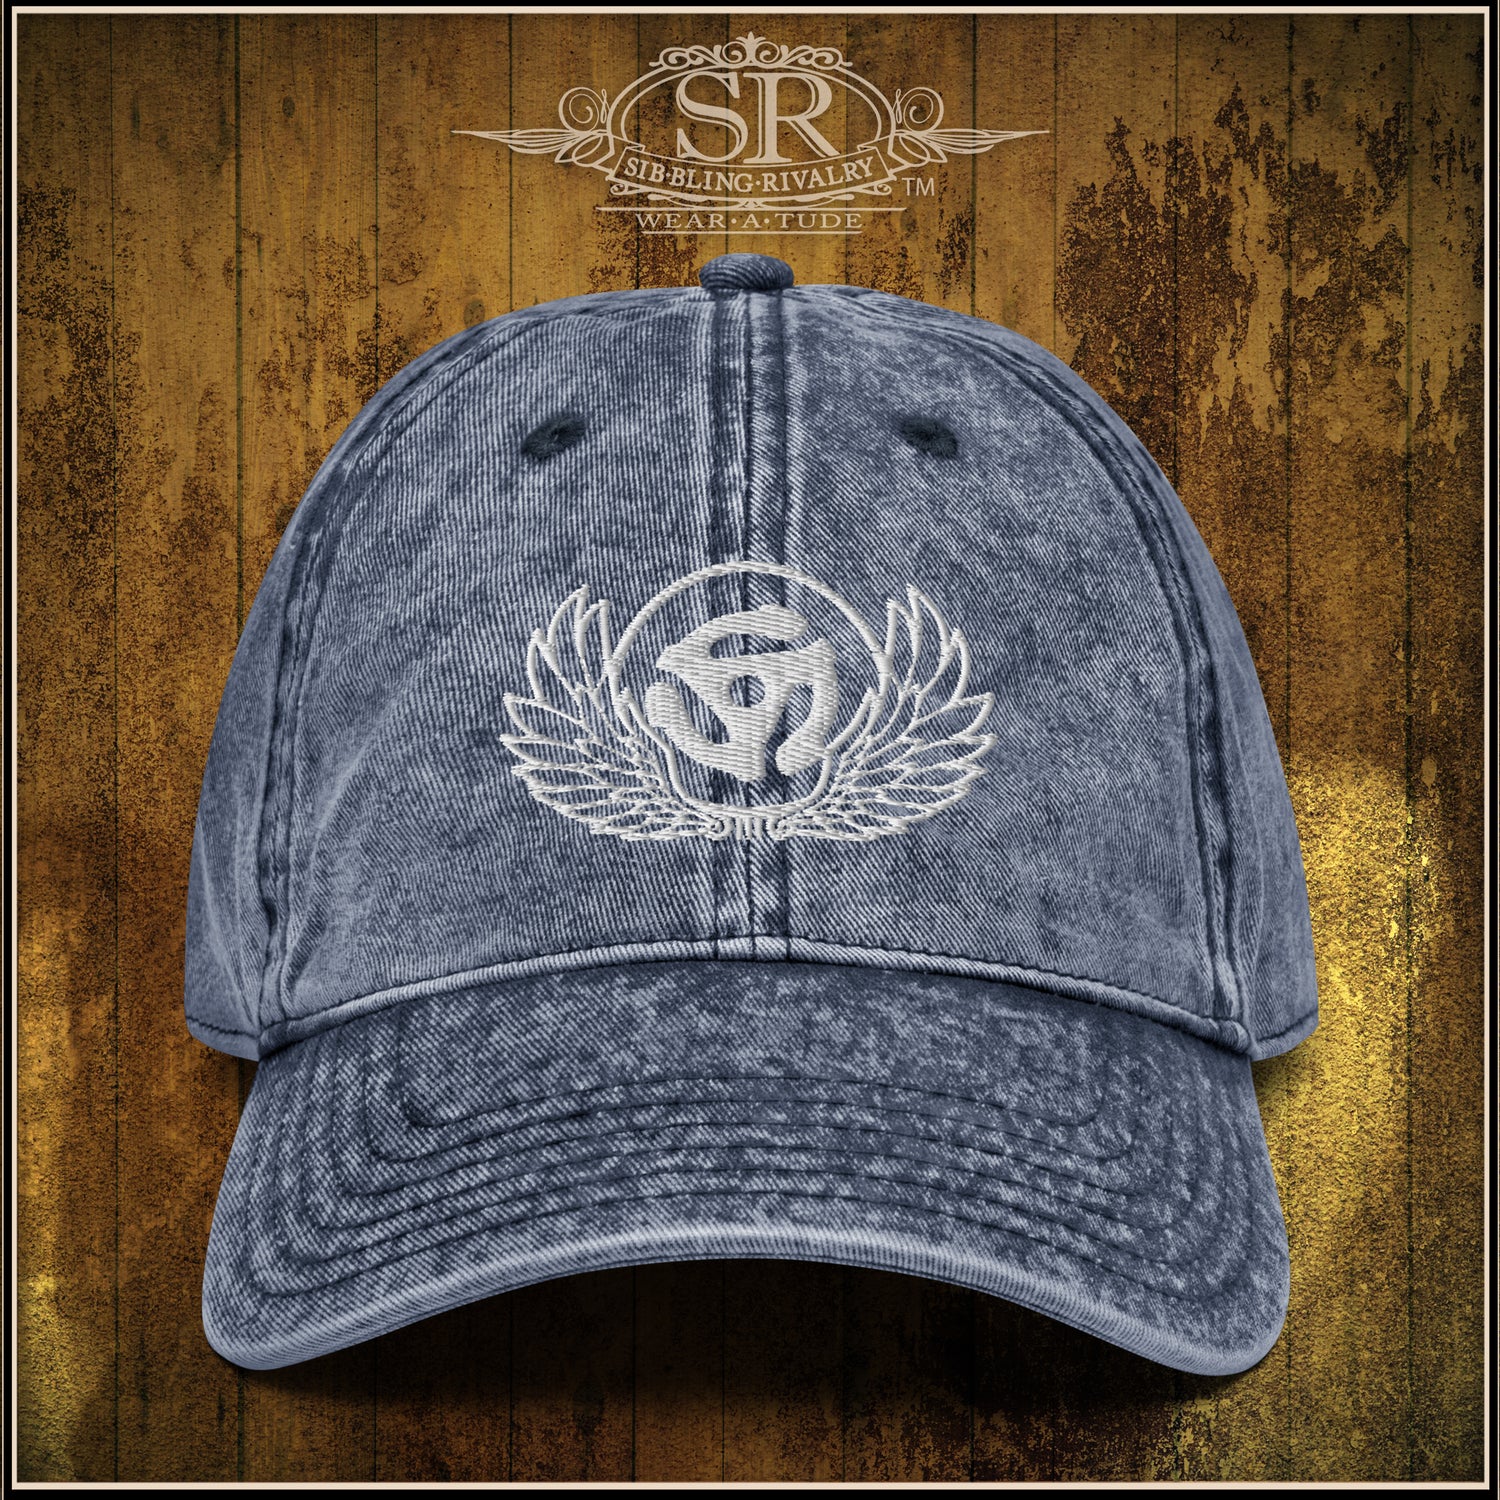 We have created our 45 Spacer logo with beautifully embroidered wings on the front of this vintage cotton twill hat , 